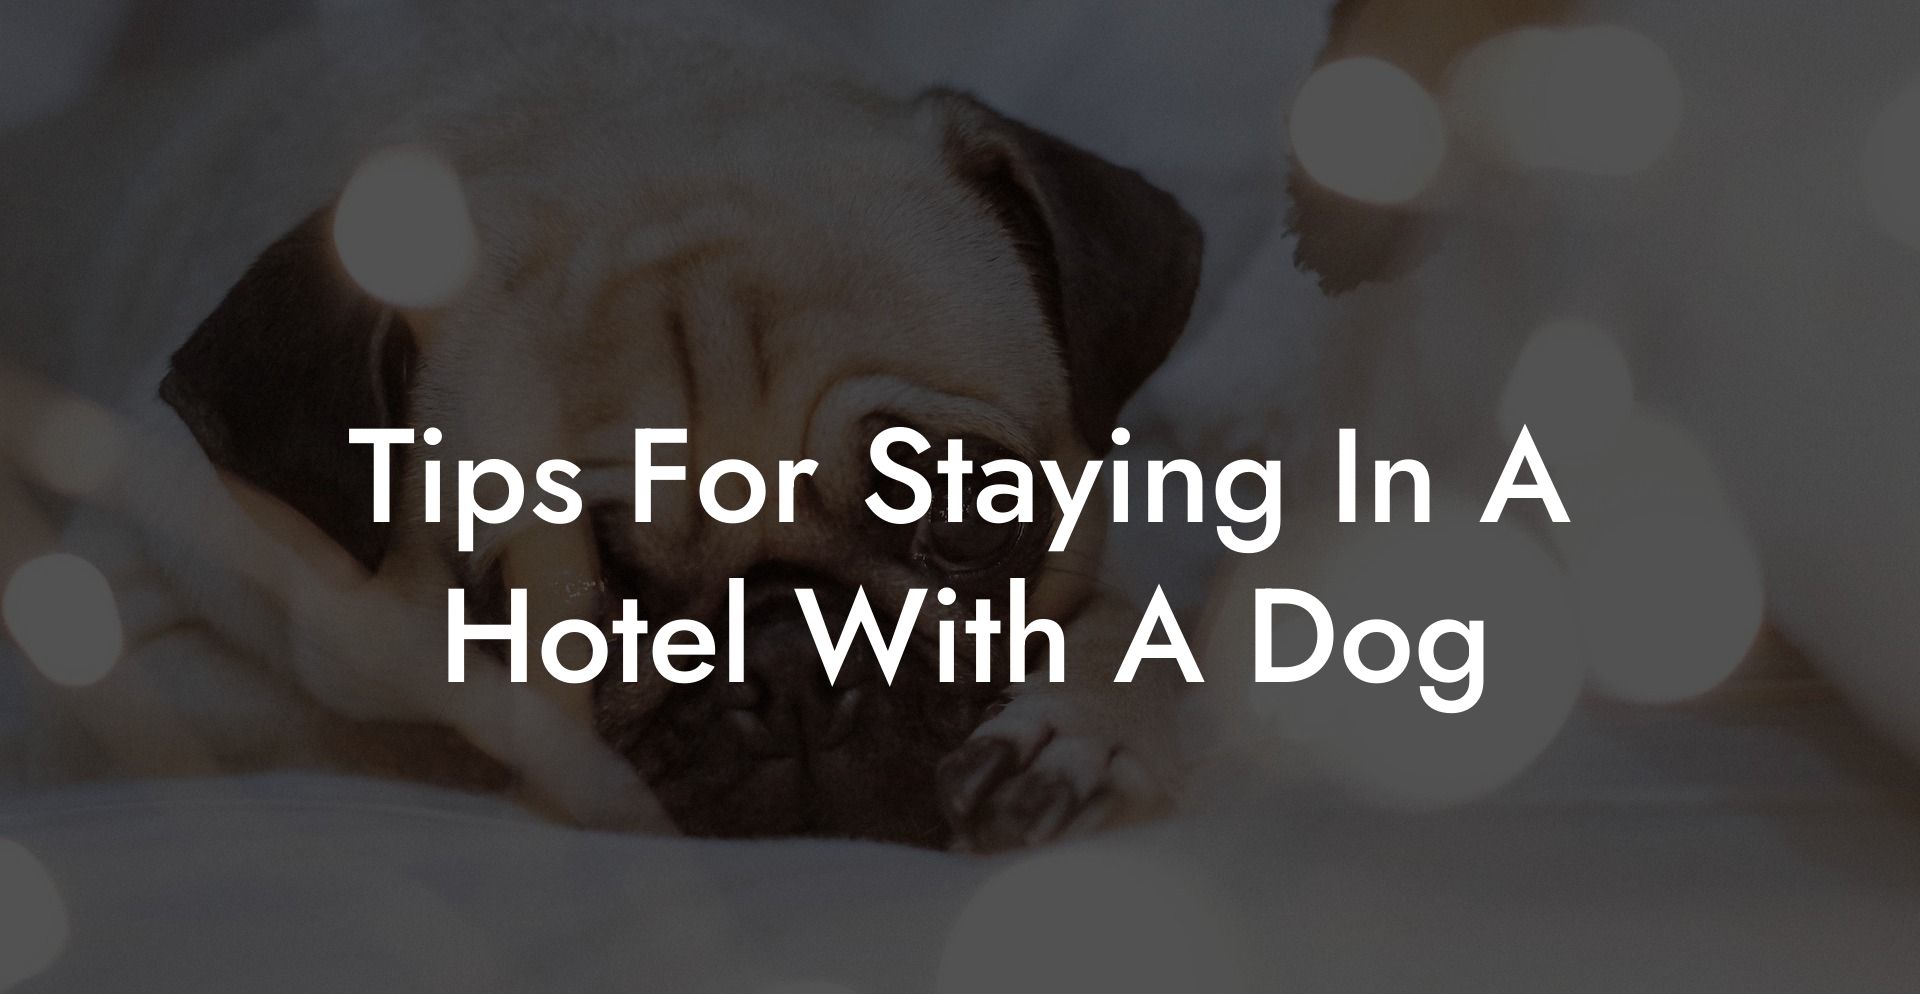 Tips For Staying In A Hotel With A Dog